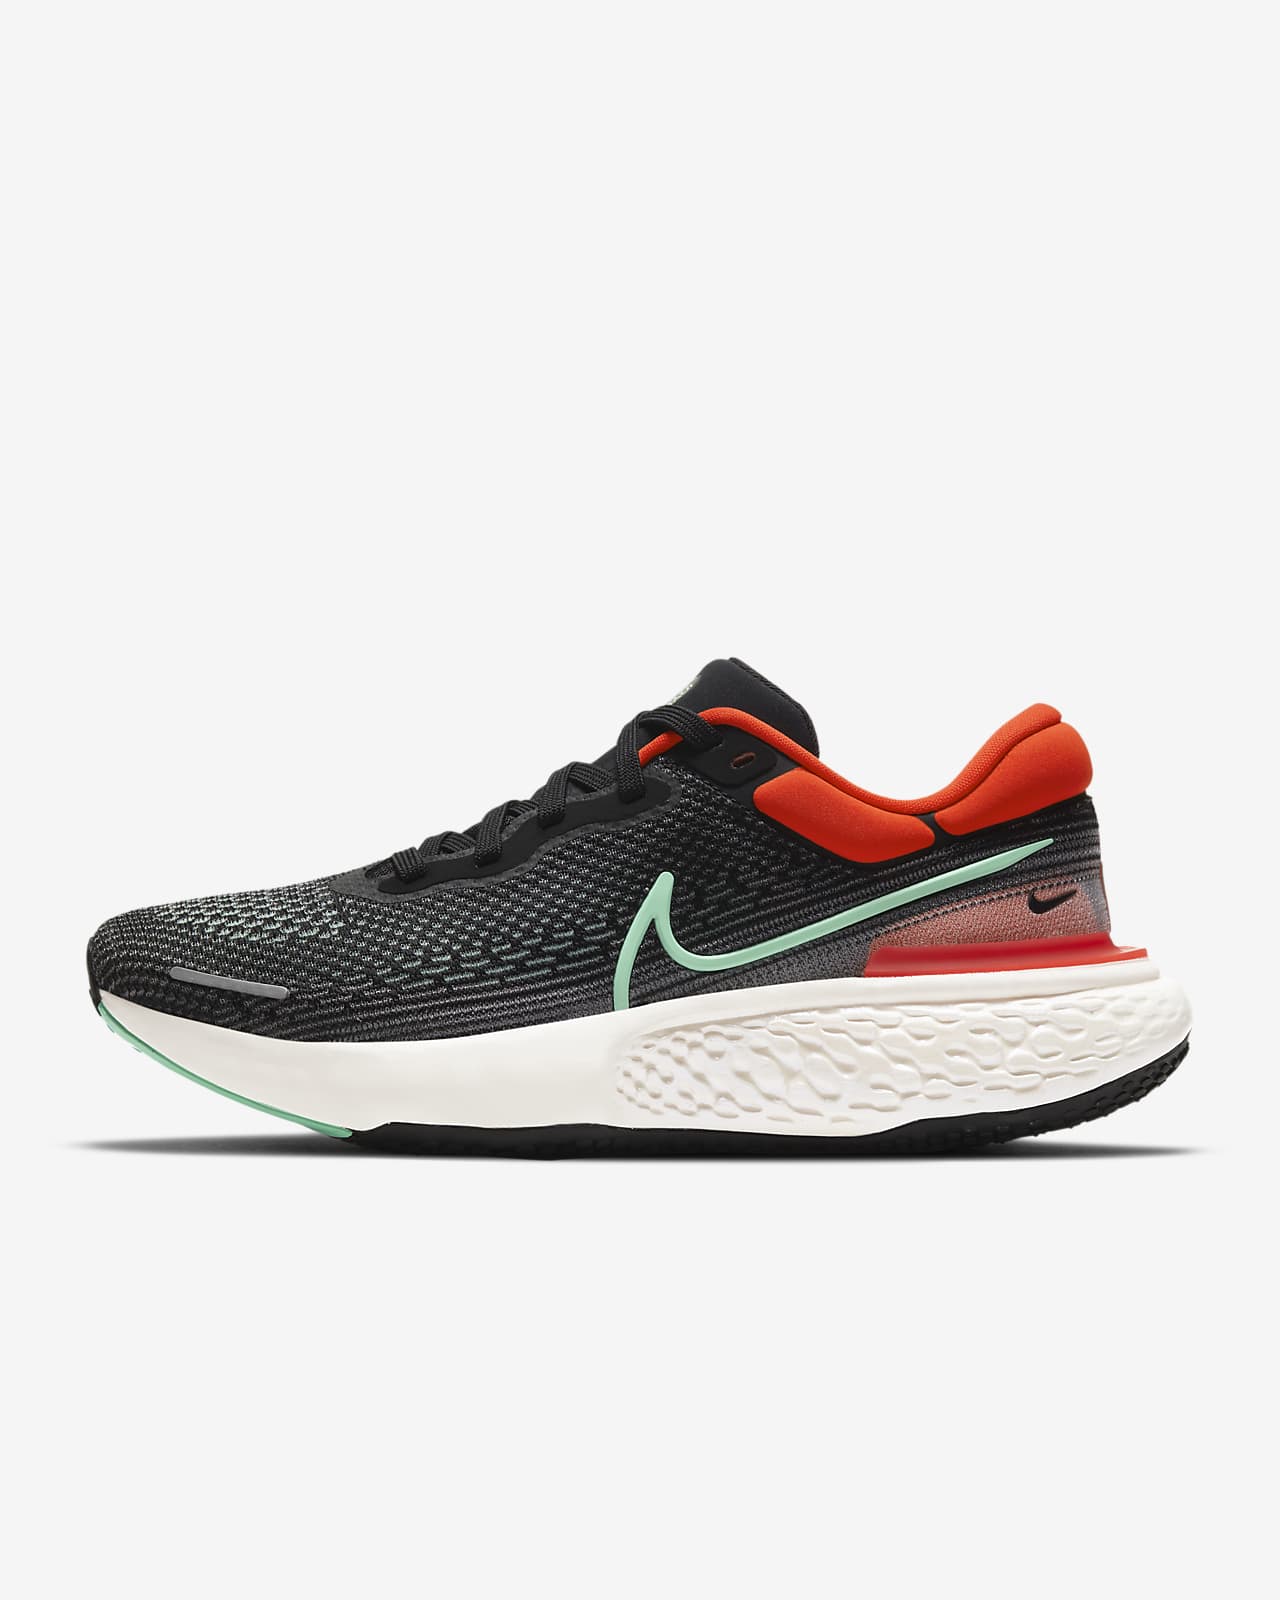 nike zoomx shoes price